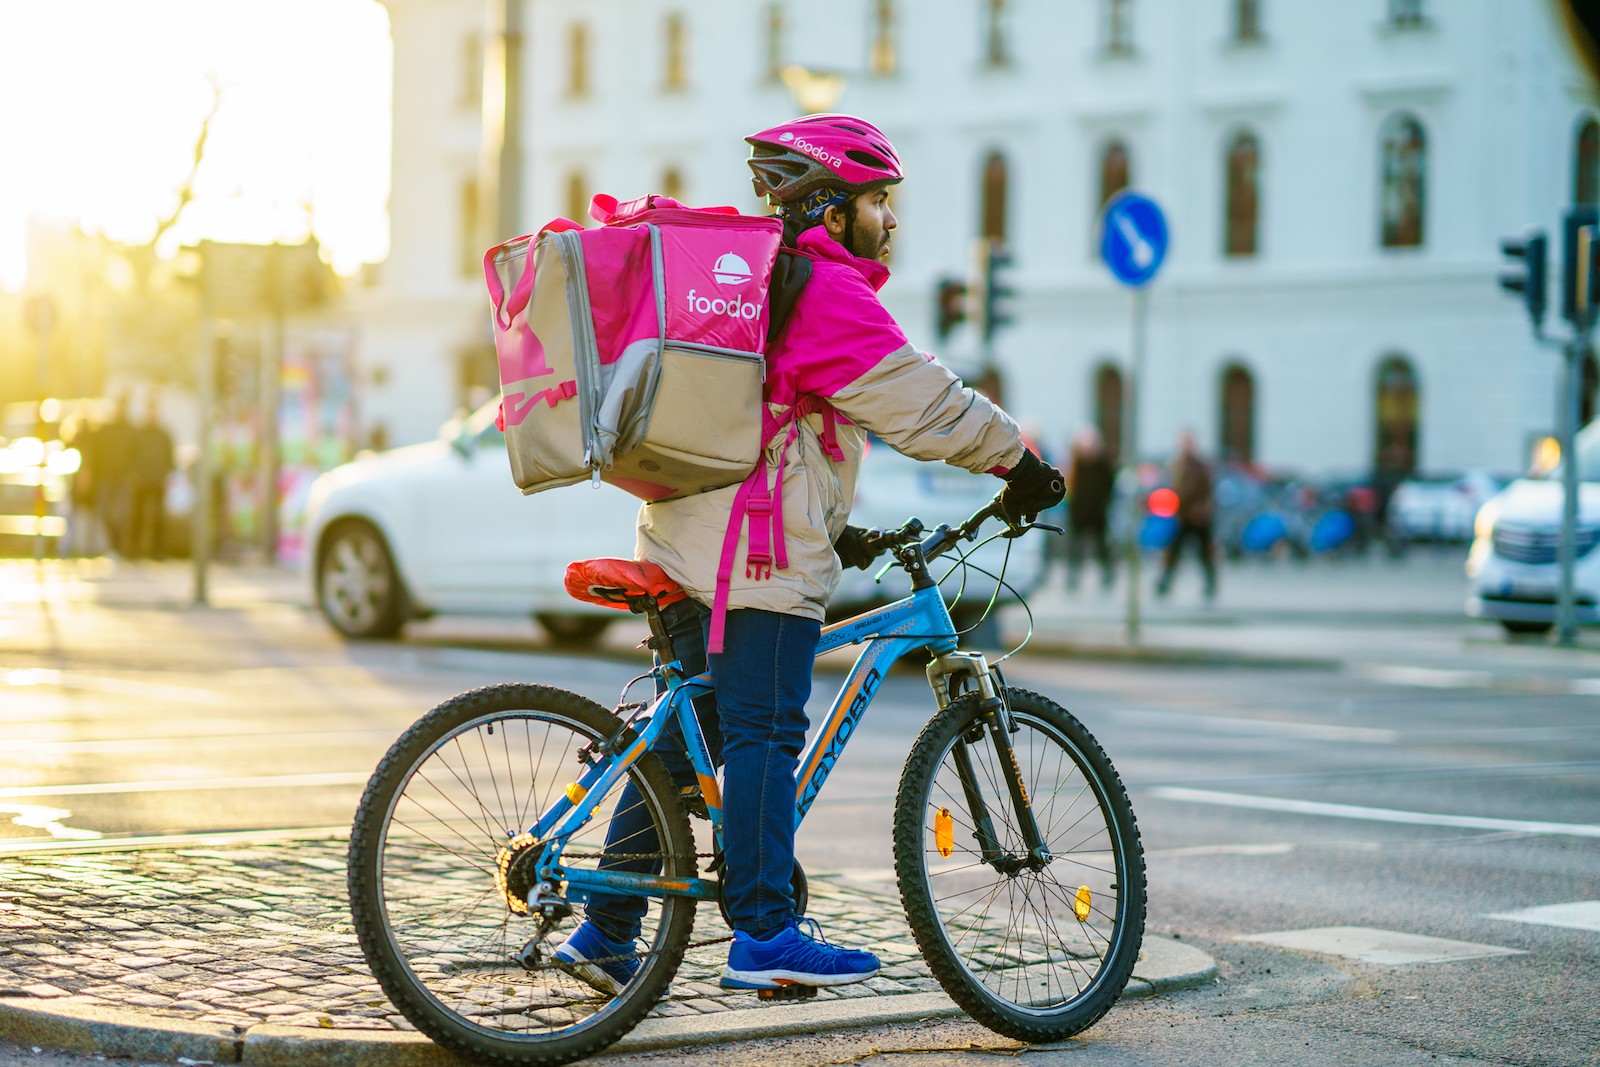 Foodora Couriers Want To Be Among First Gig Economy Workers To Unionize In Canada